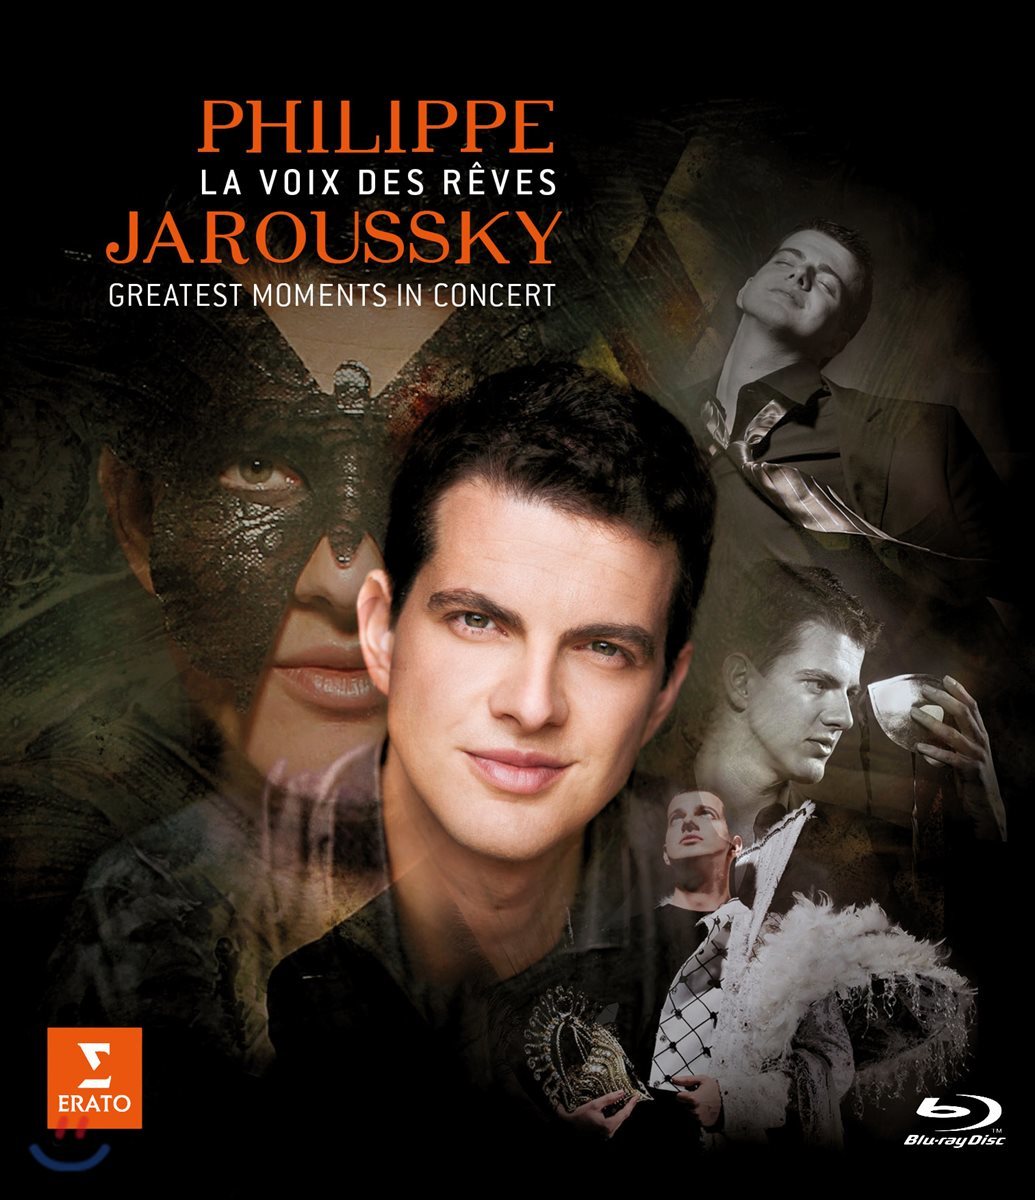 Philippe Jaroussky 필립 자로스키 베스트 콘서트 영상 블루레이 (La voix des reves - Greatest Moments on Concerts)